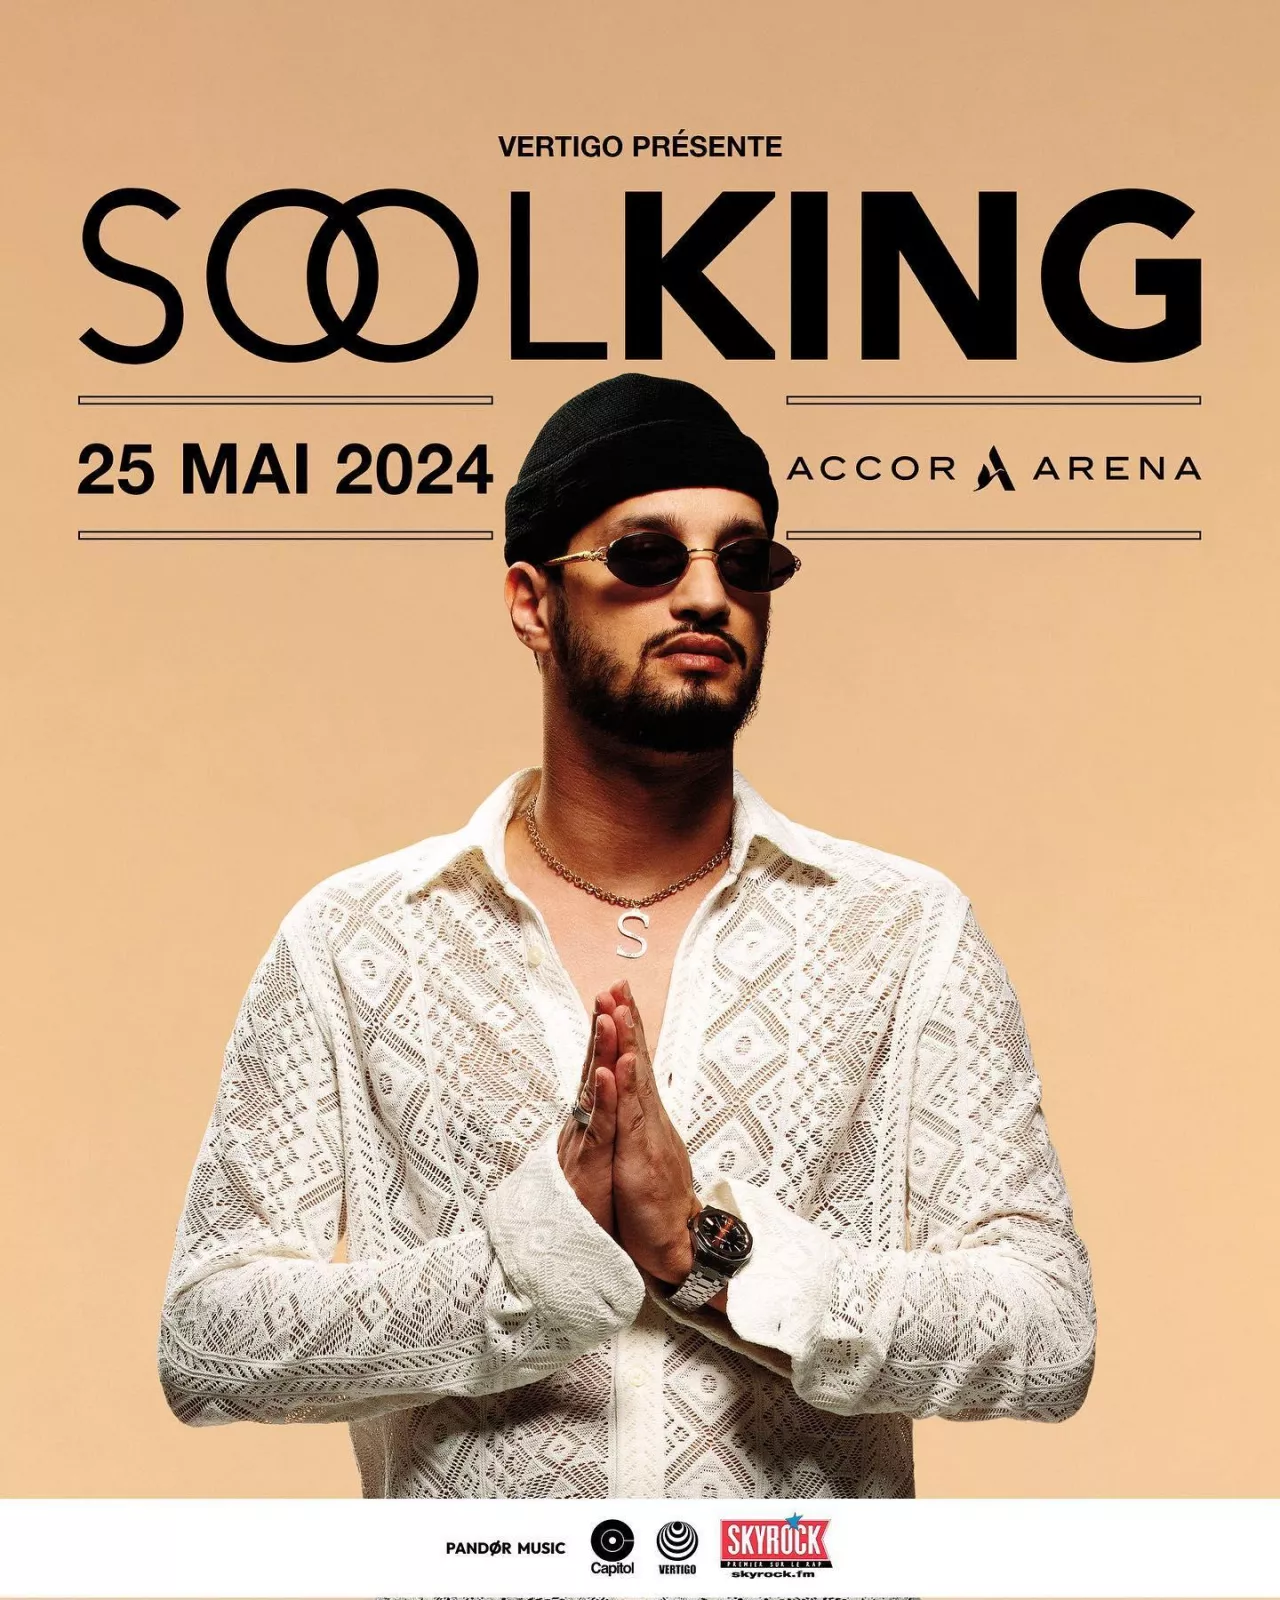 The openwork white shirt worn by Soolking on the poster of his concert ...